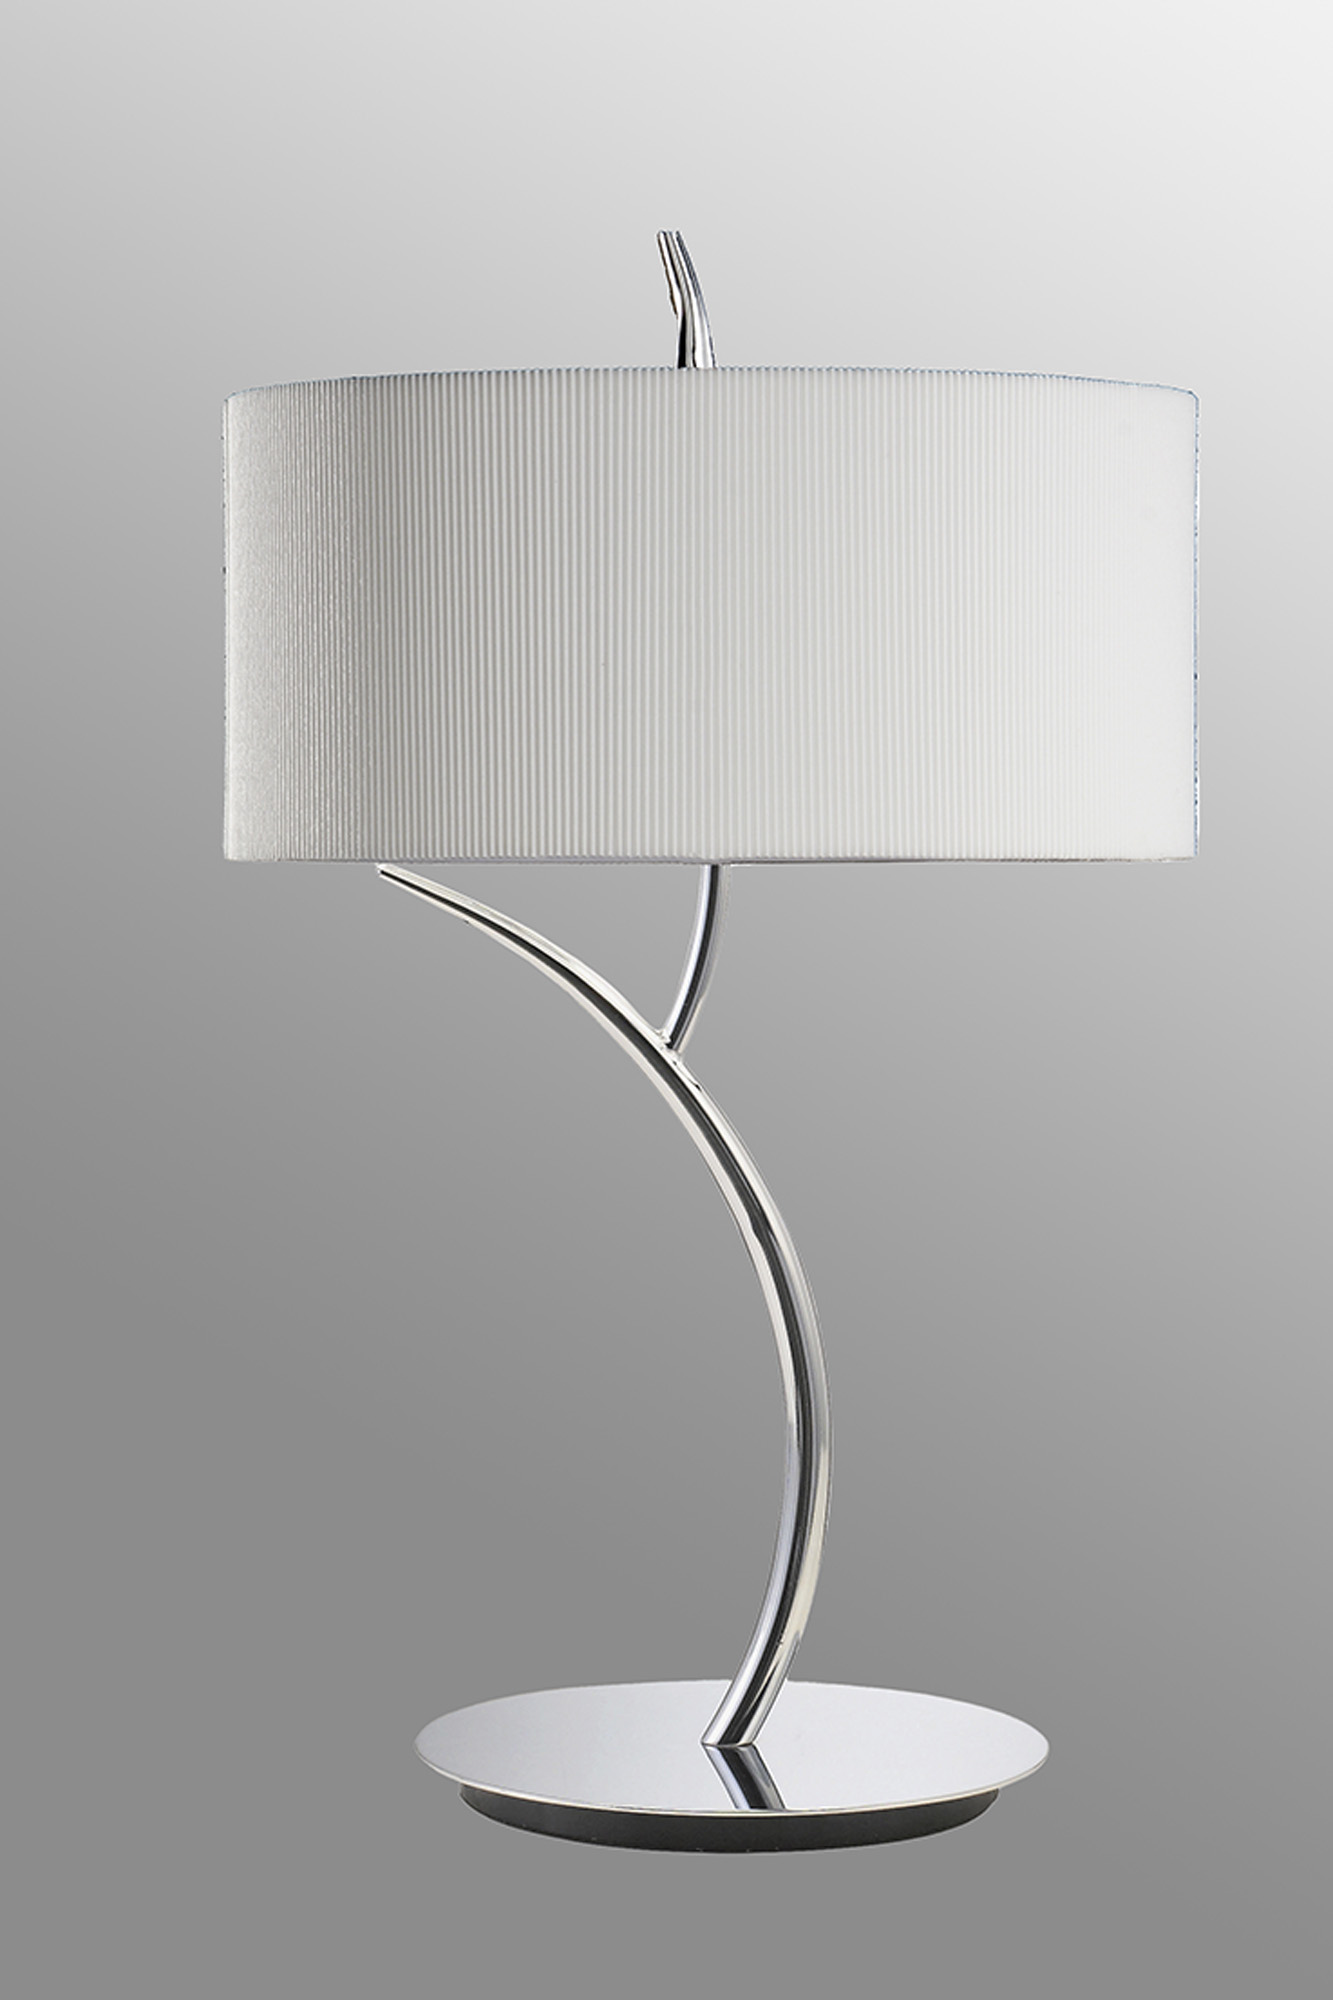 Eve Polished Chrome-Spain White Table Lamps Mantra Shaded Table Lamps